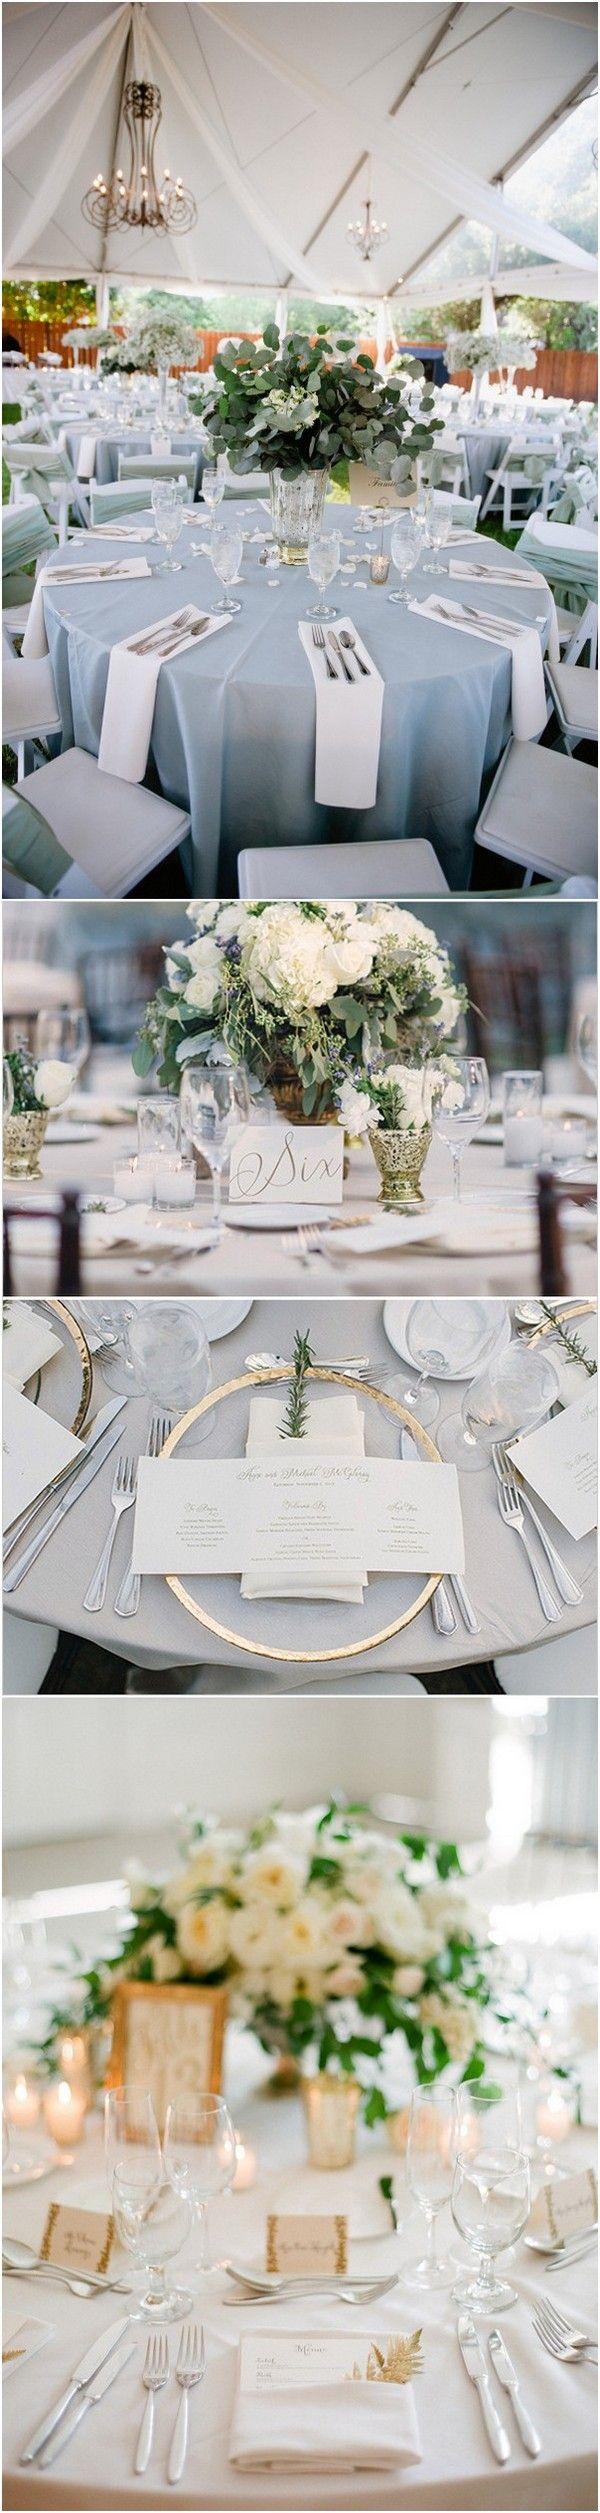 Wedding - Top 15 So Elegant Wedding Table Setting Ideas For 2018 - Page 3 Of 3